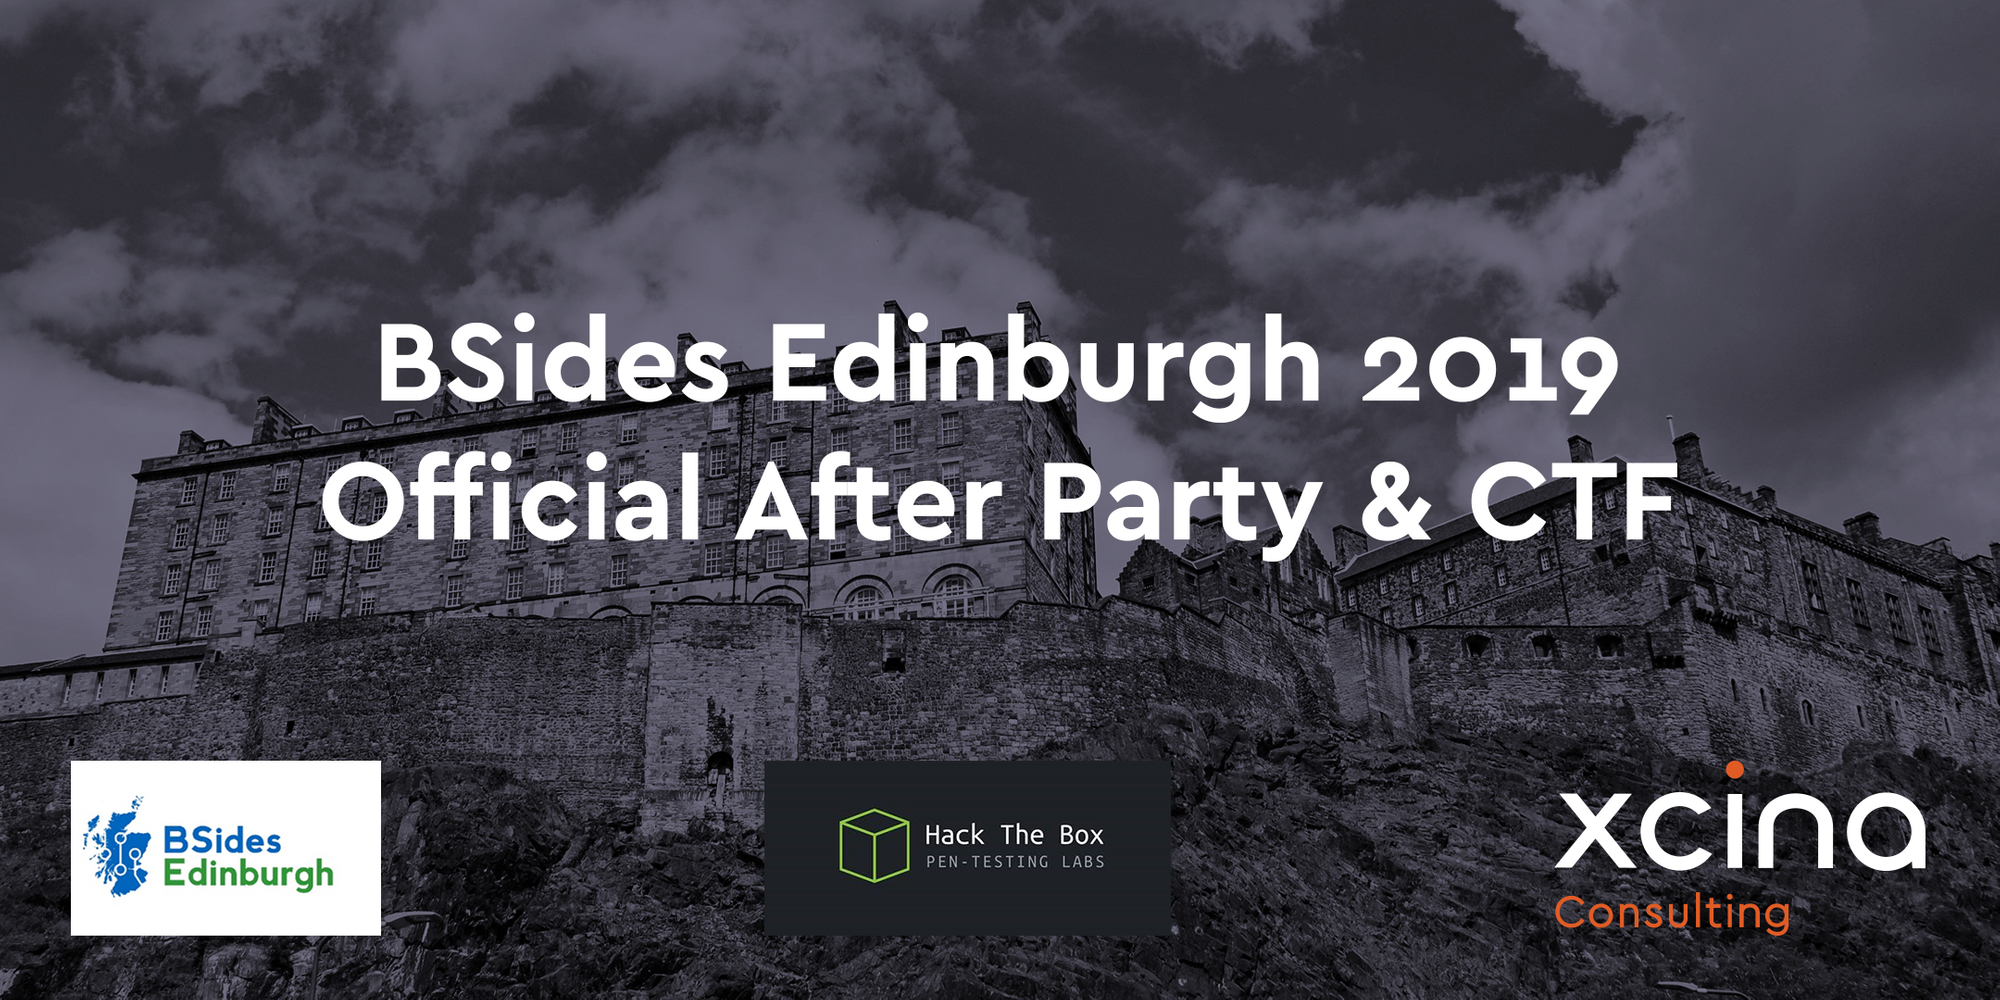 BSides Edinburgh 2019 - Official After Party & CTF